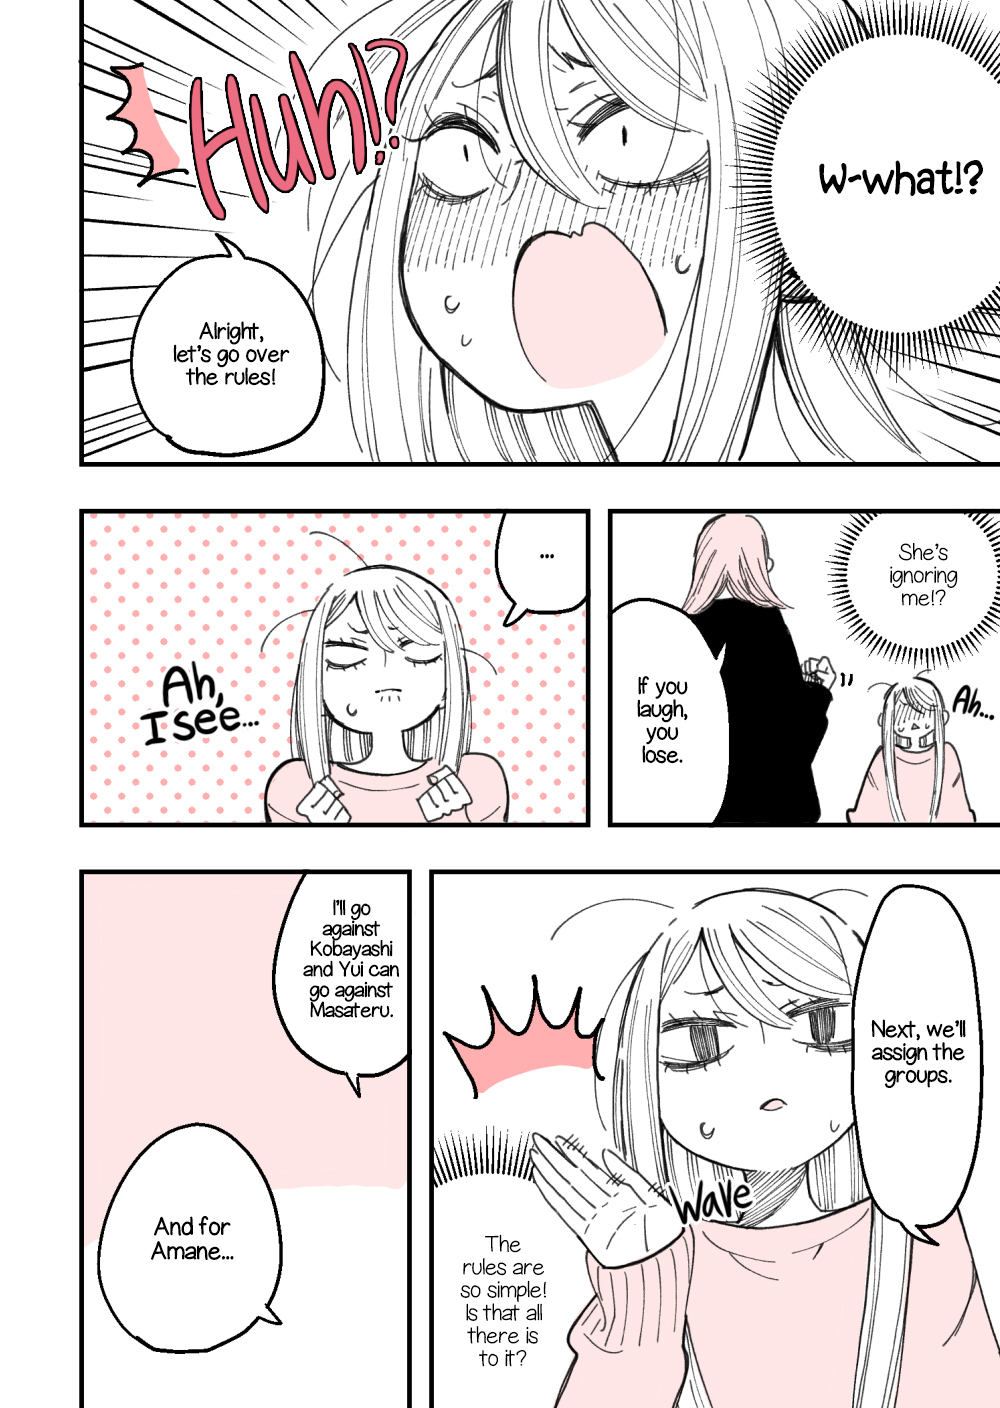 The Story of a Girl with Sanpaku Eyes Vol. 1 Ch. 21